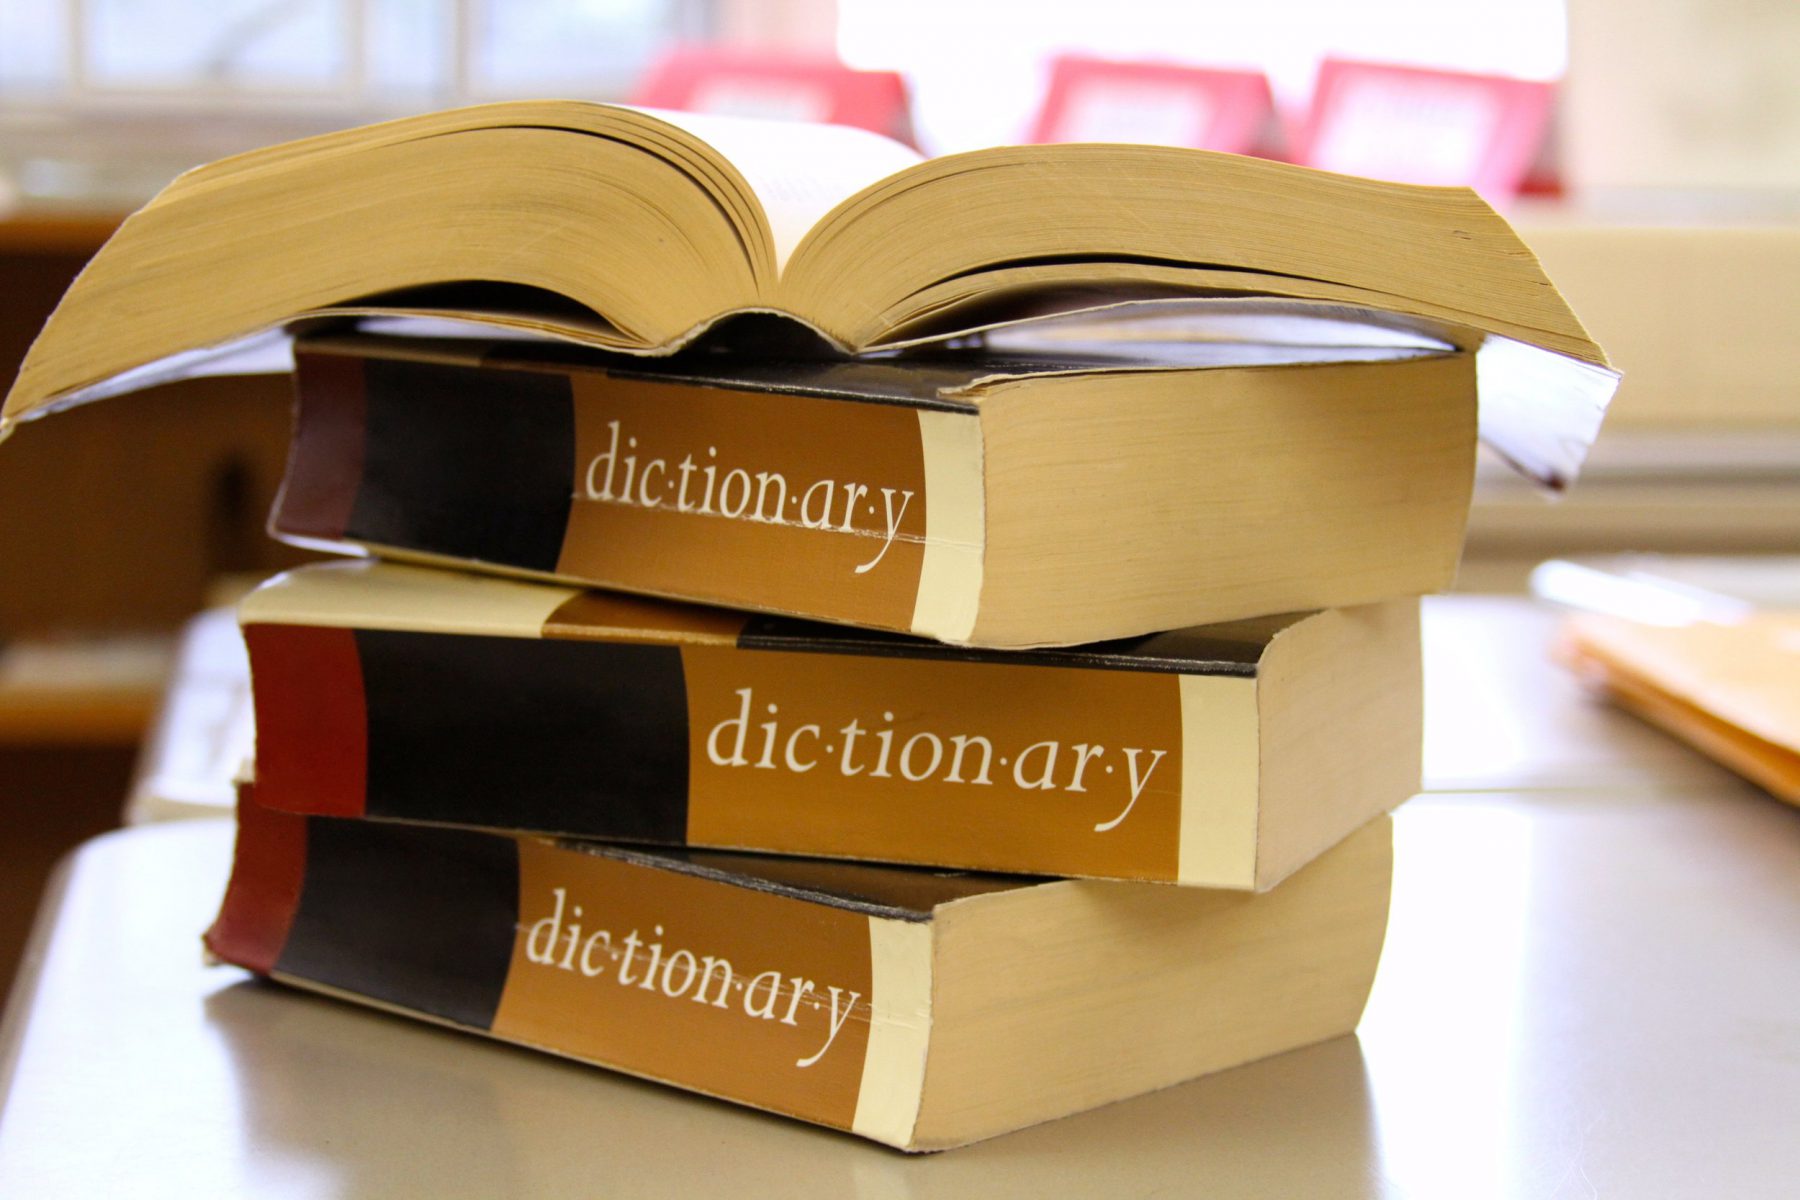 A stack of dictionaries